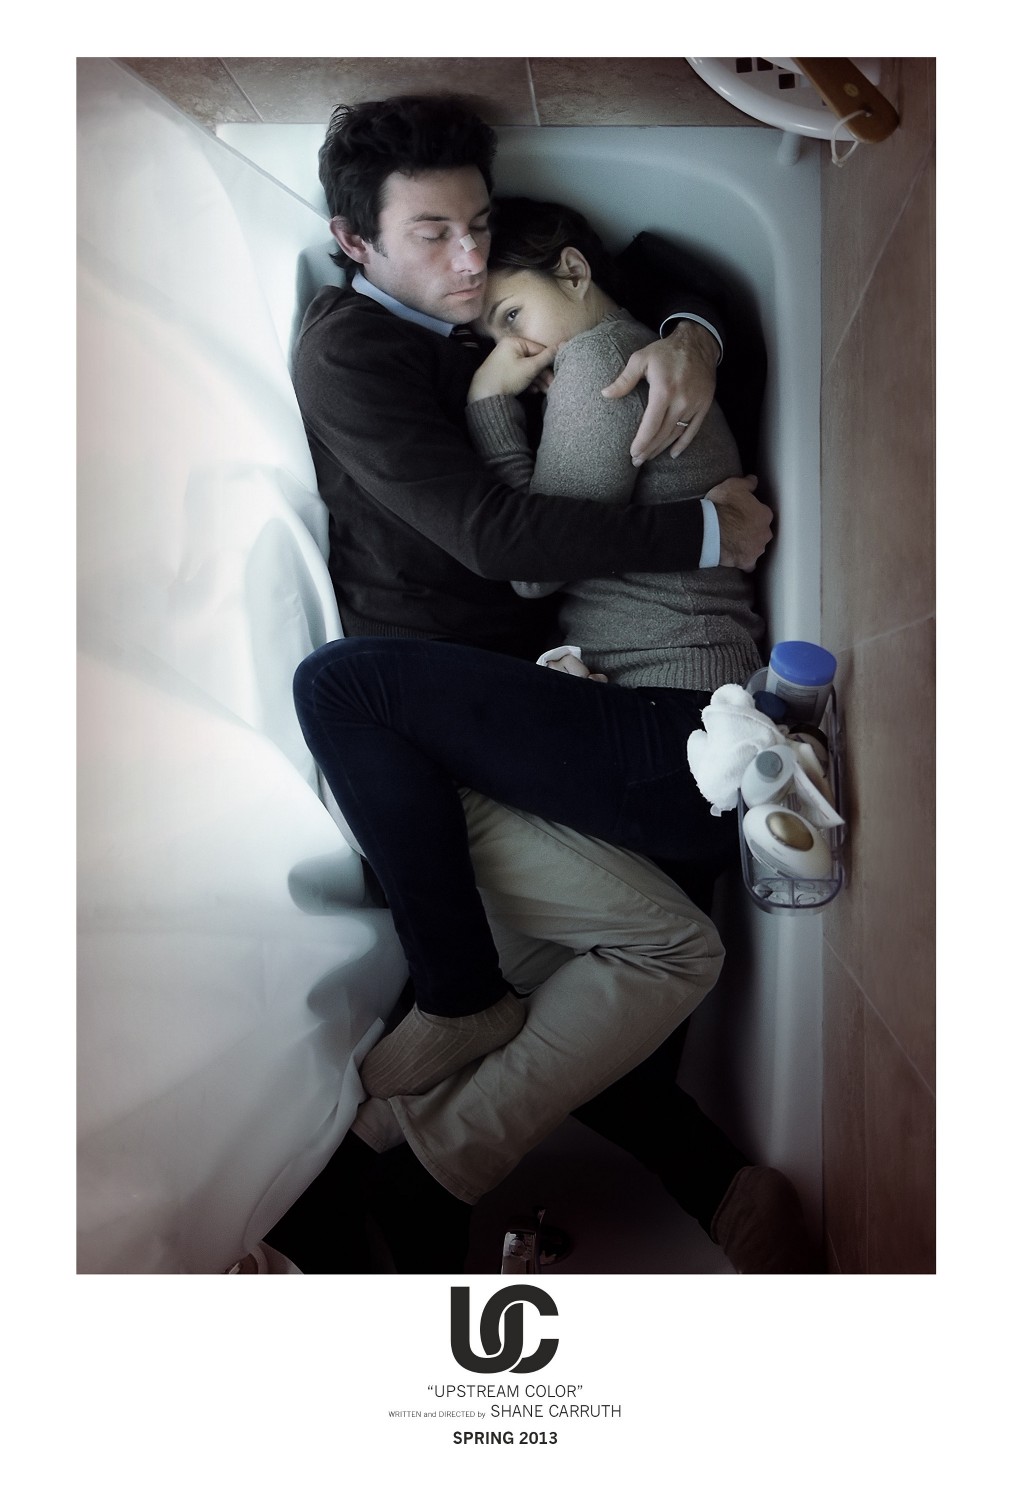 upstream_color_xlg